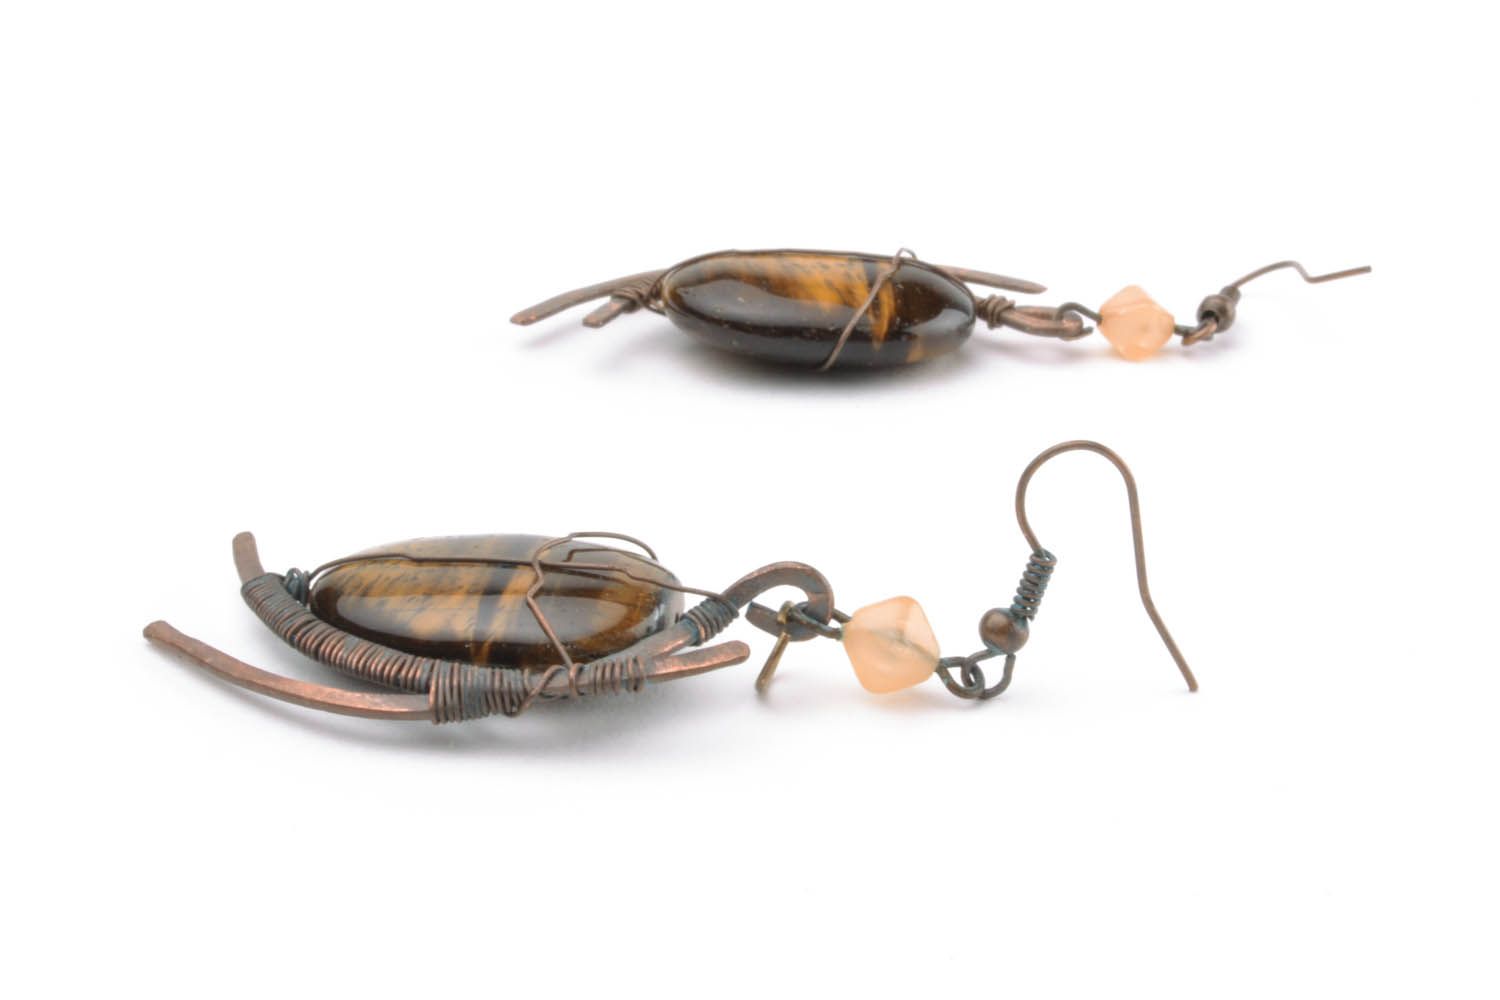 Copper earrings with tiger's eye stone photo 3